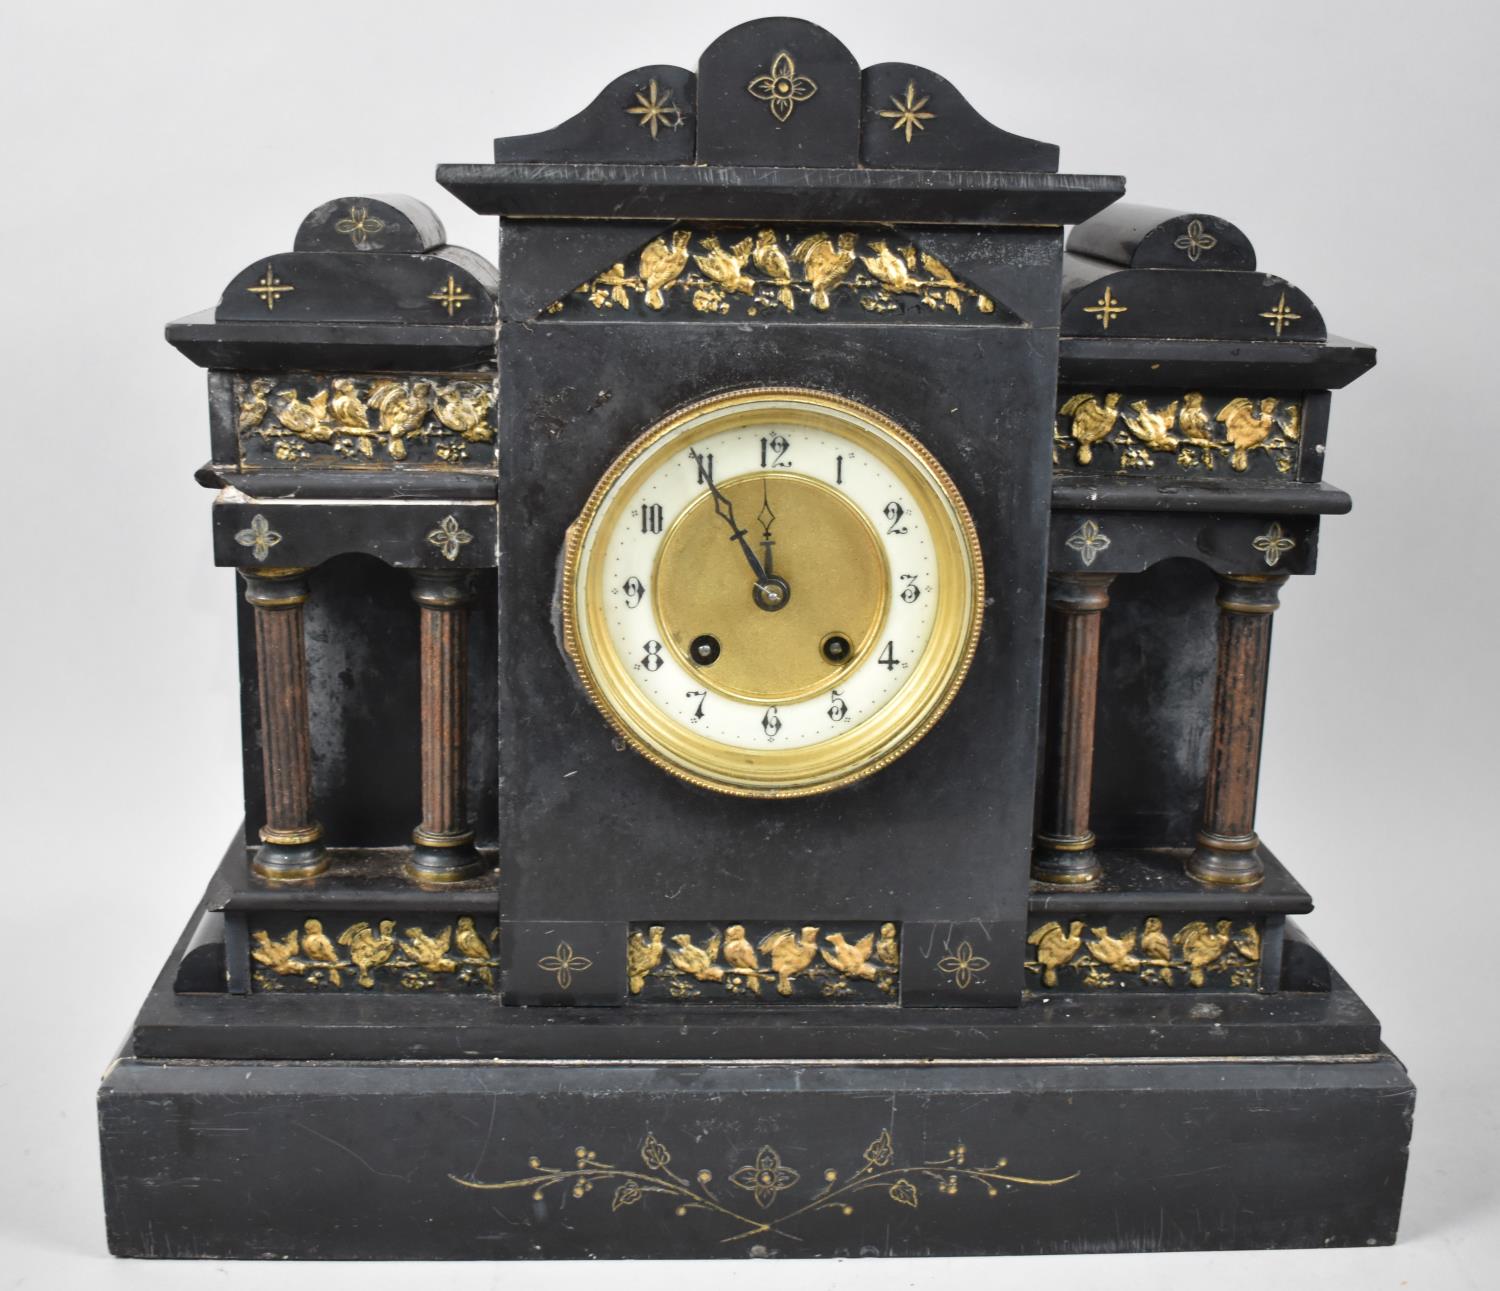 A French Black Slate Mantel Clock of Architectural Form with Gilt Highlights and Reeded Columns with